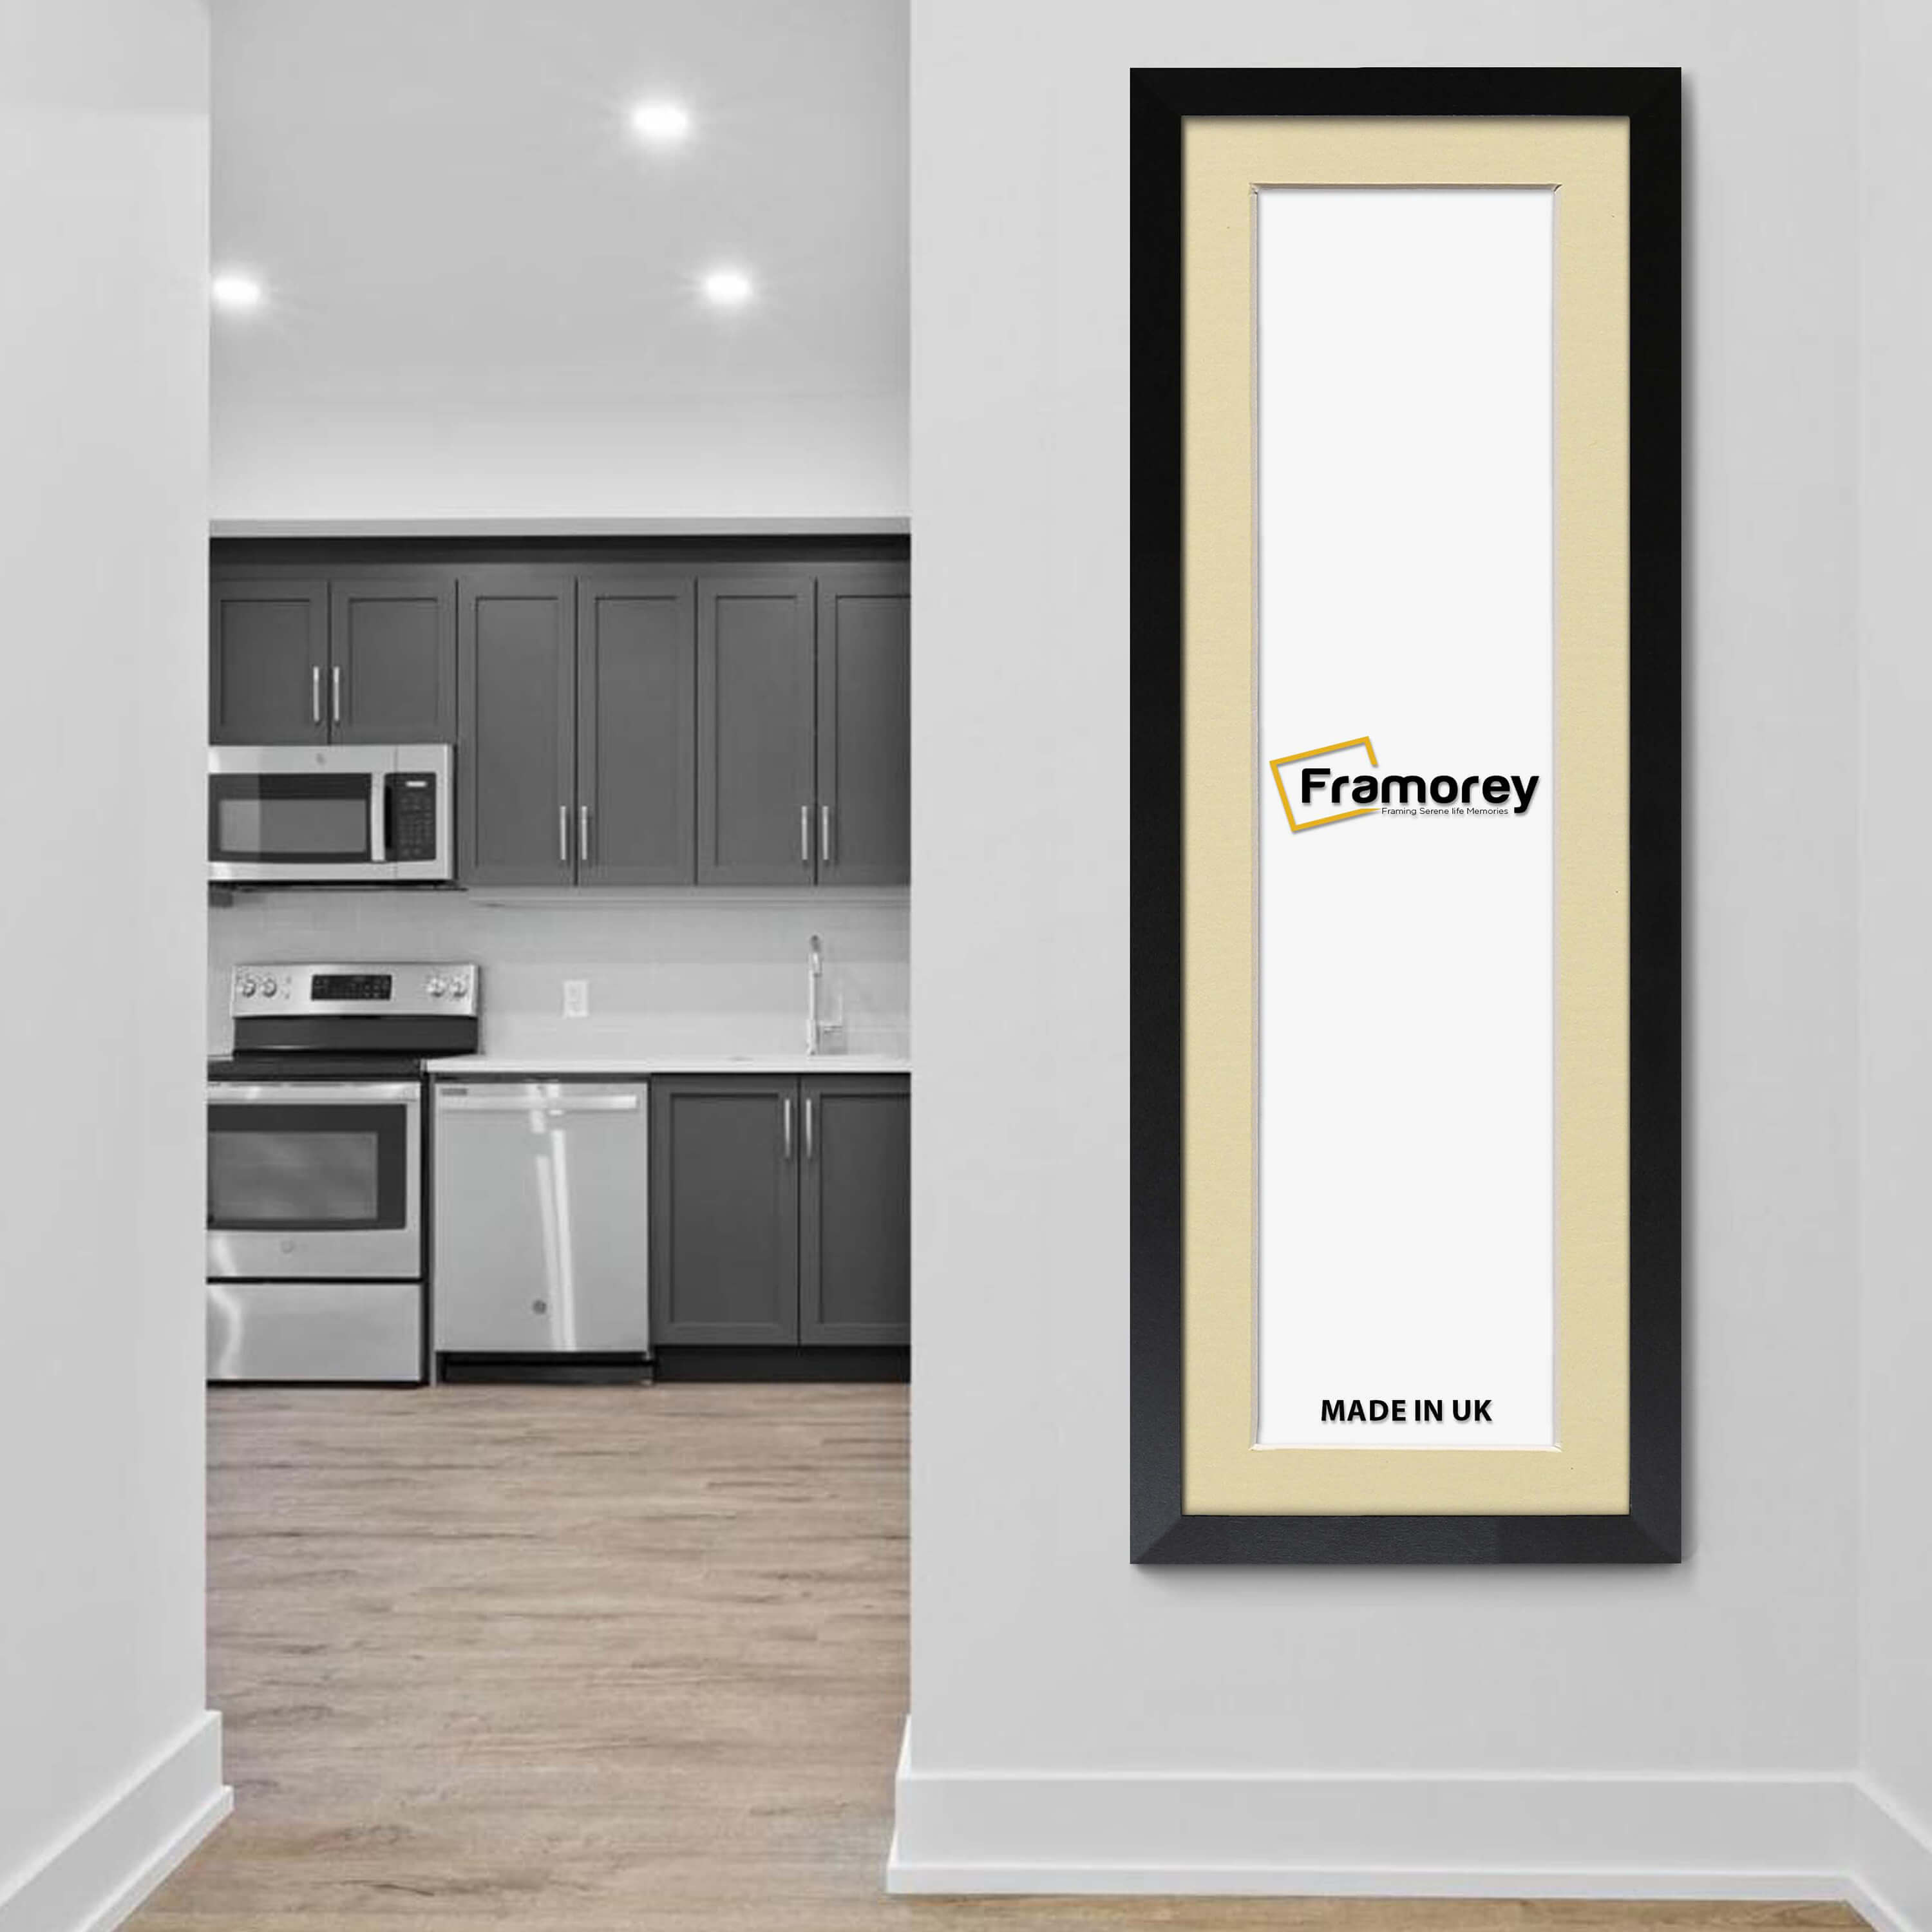 Panoramic Matt Black Picture Frame With Ivory Mount Wall Décor Frame